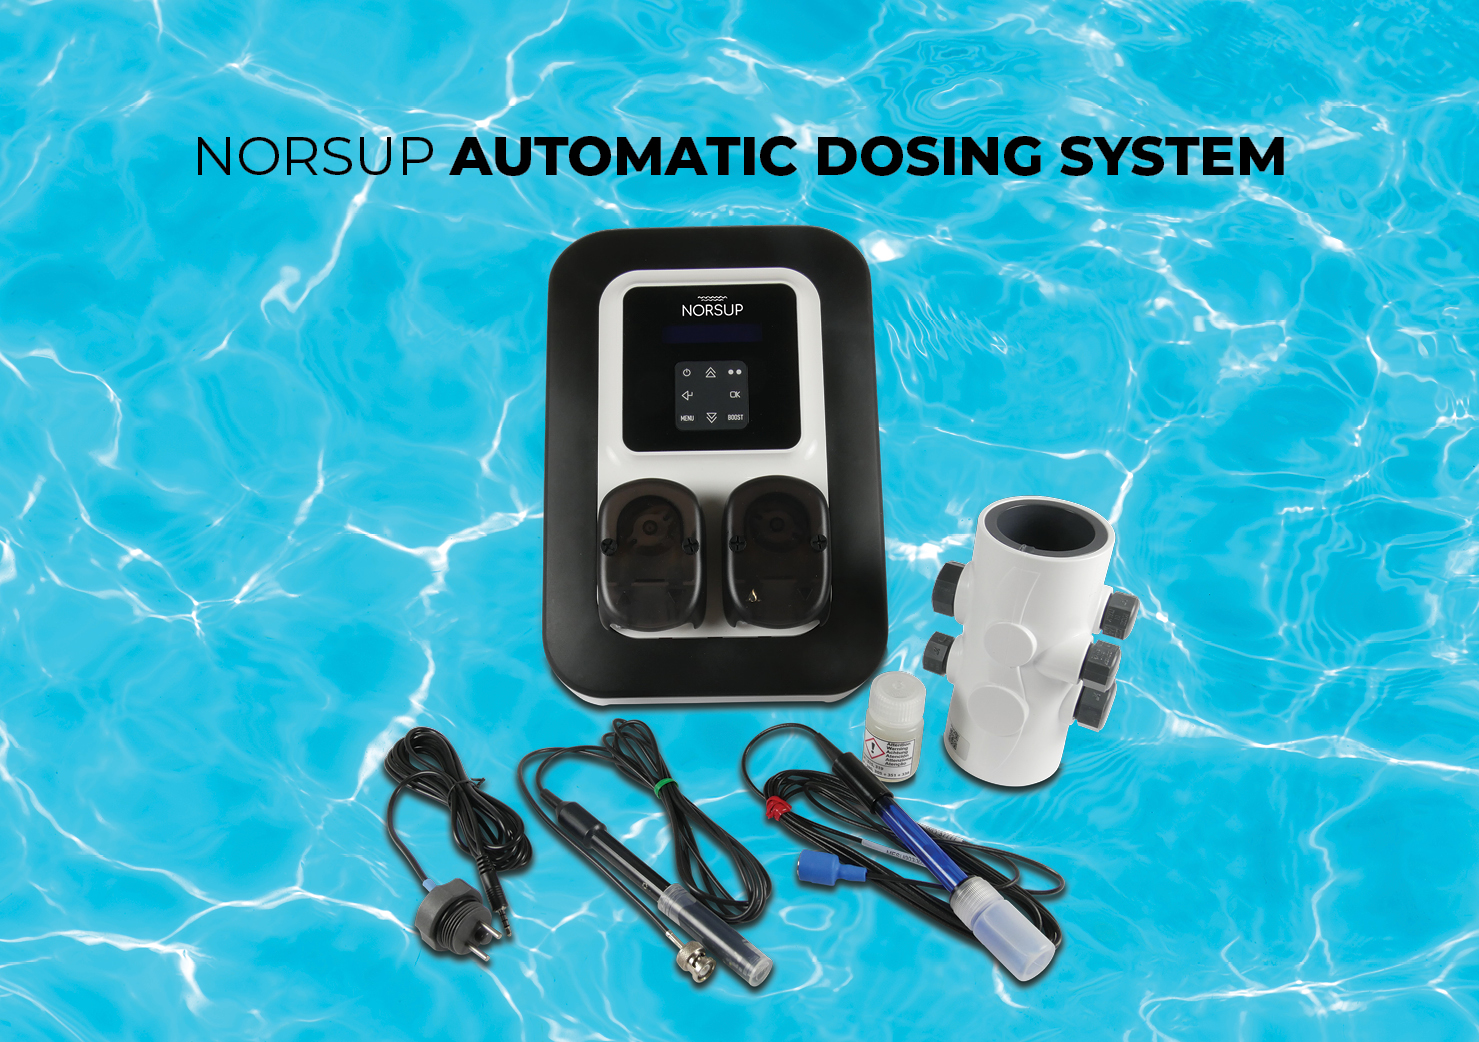 Norsup automatic dosing system